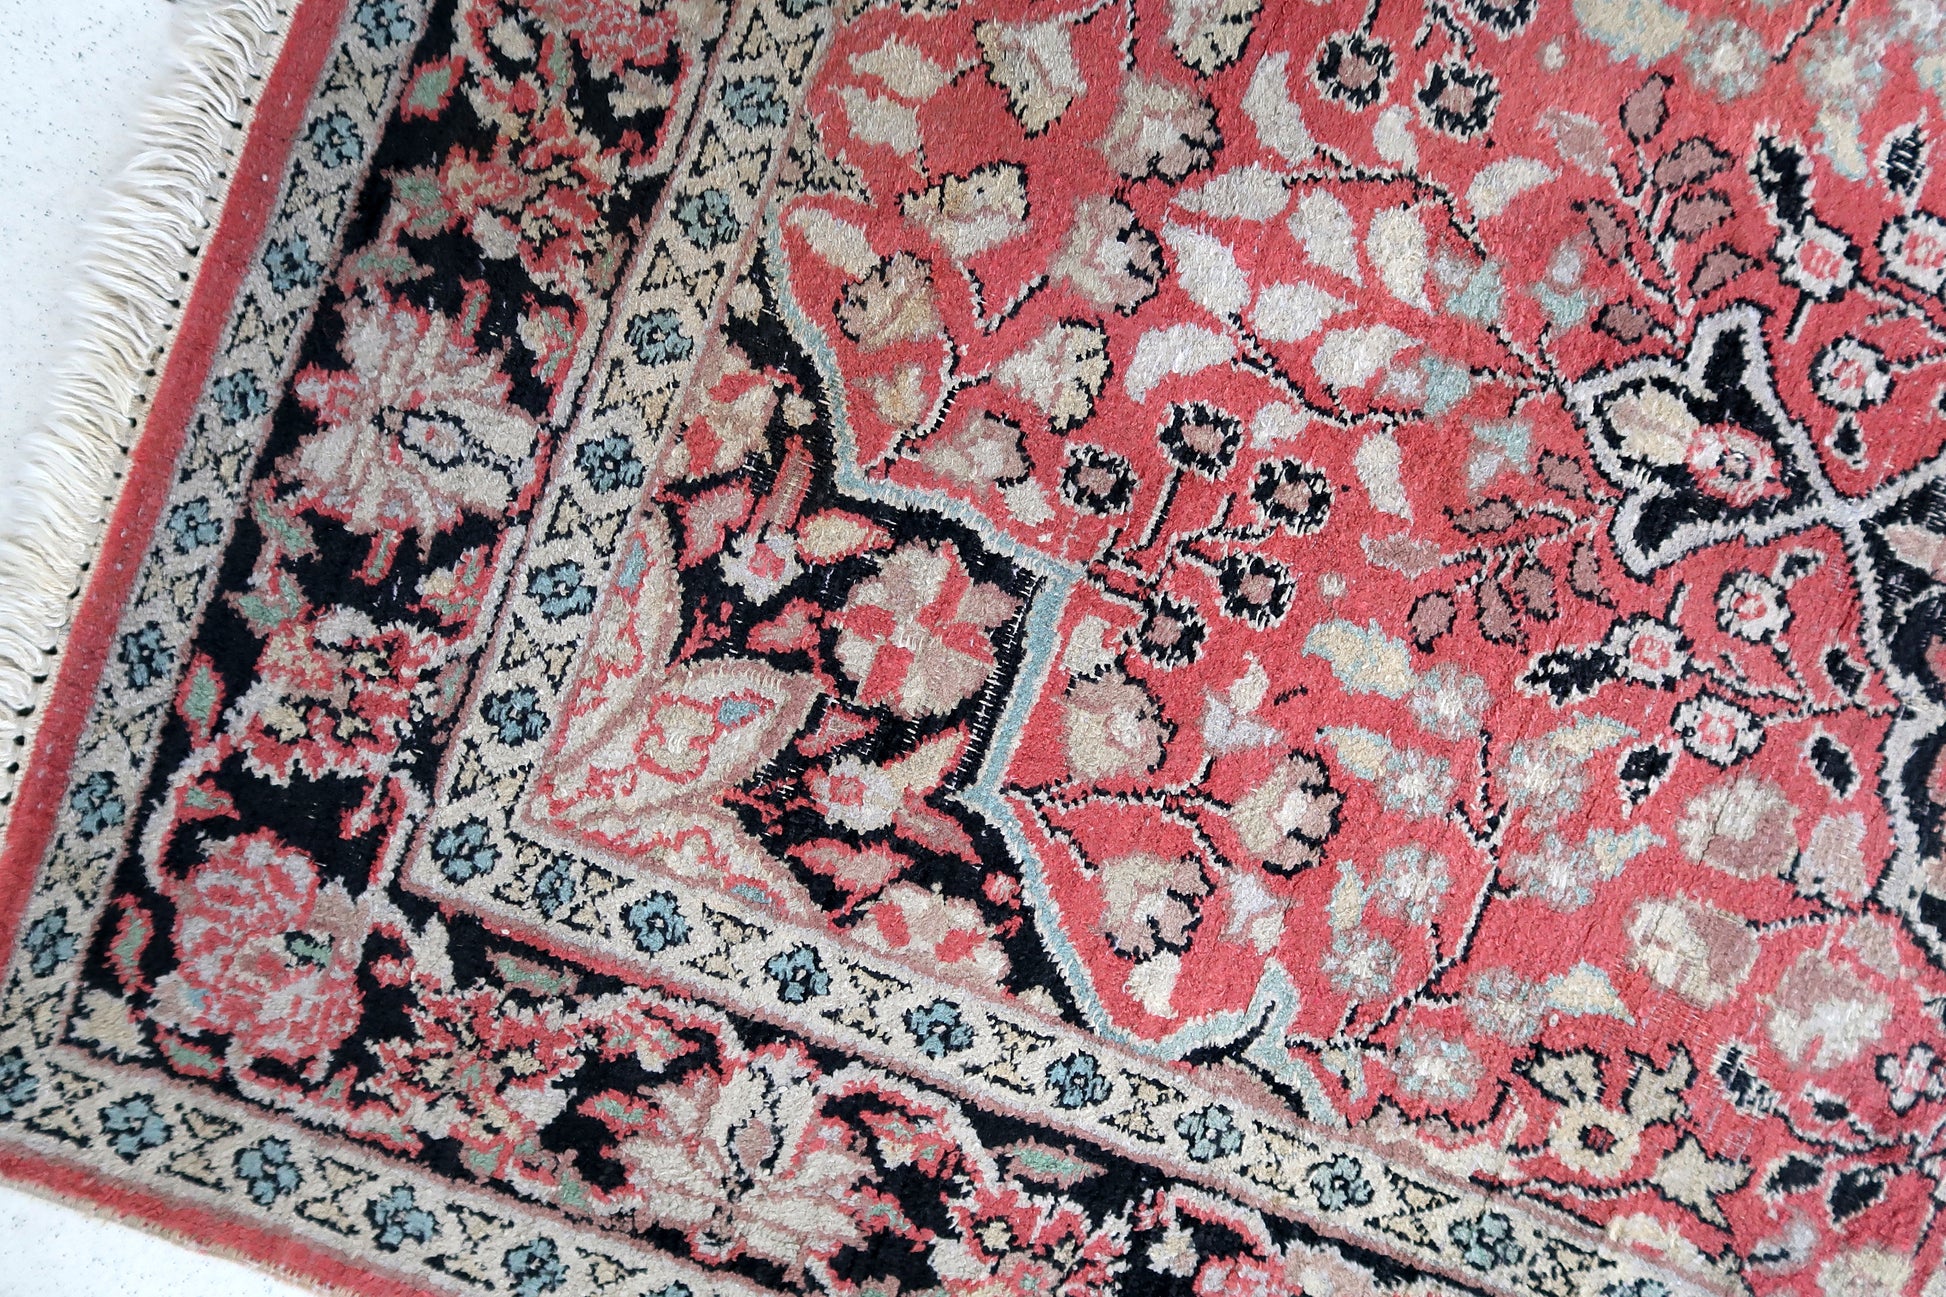 Handmade vintage Persian Tabriz rug made in Kashmir wool. The rug is from the end of 20th century in original good condition. The rug is in traditional medallion design in pink and black colors. Like many recent Tabrizes, this example shows floral figures drawn in a manner suggestive of Safavid art.